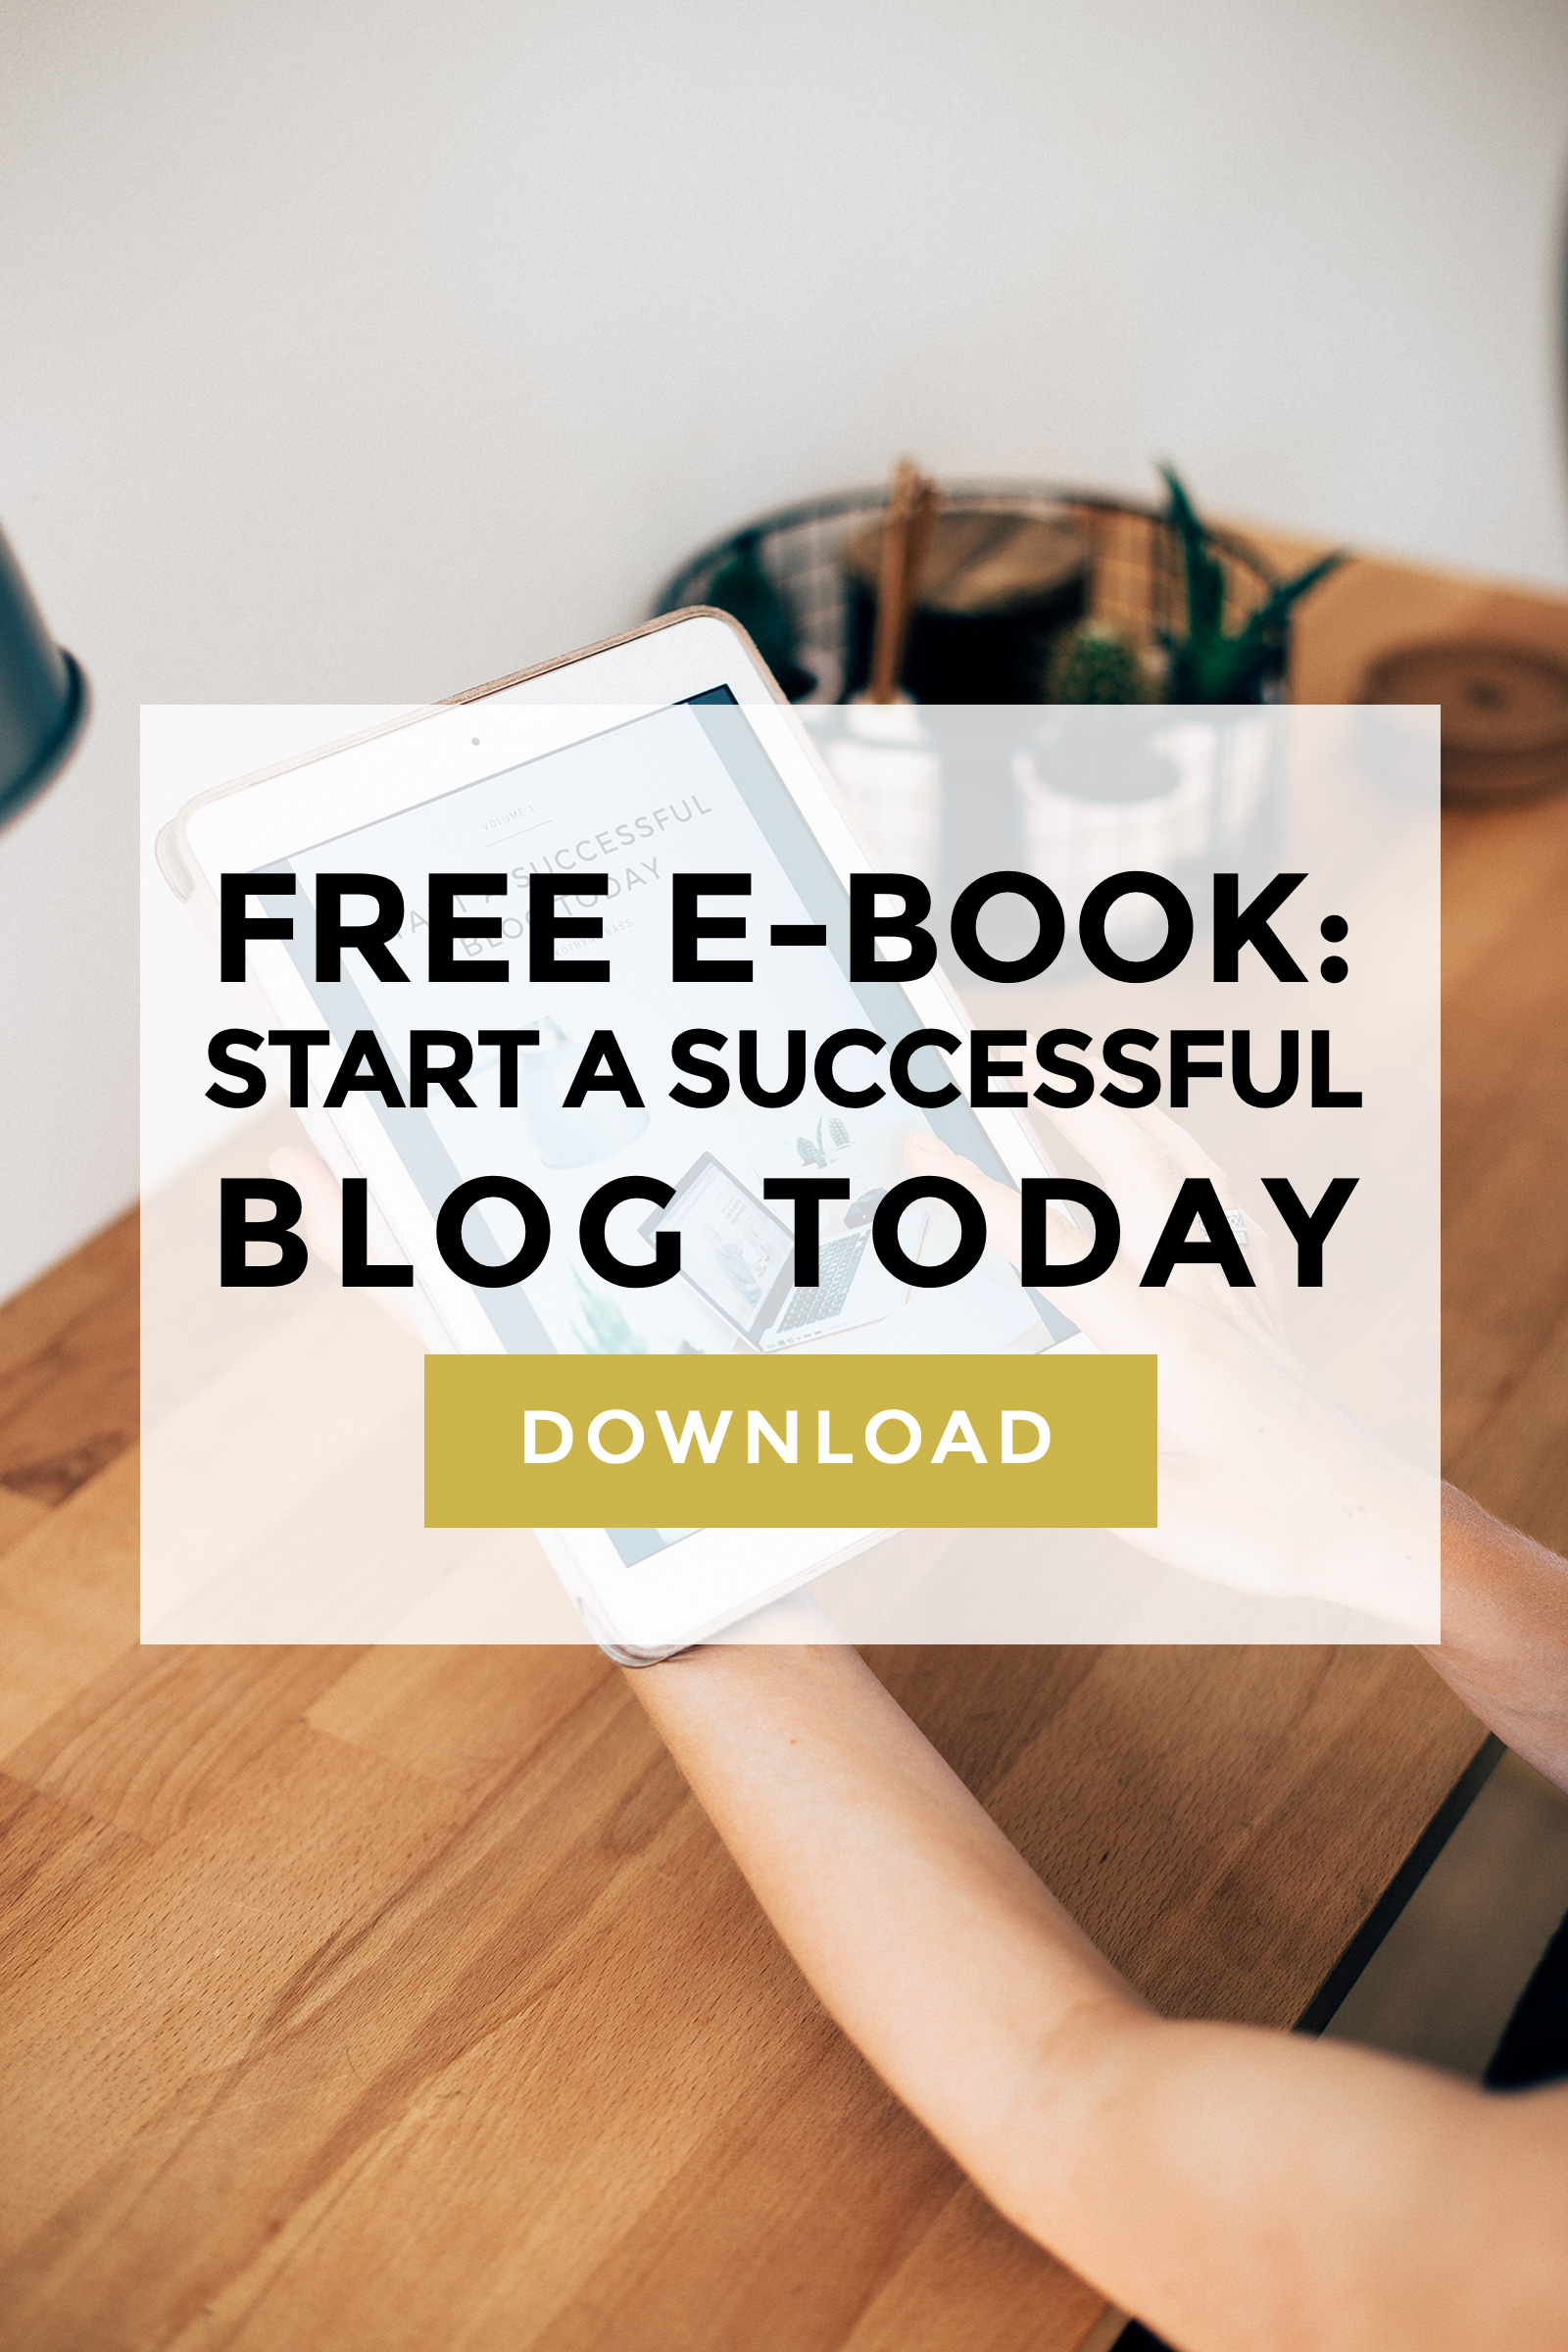 I put together an e-book for all of you starting out as bloggers & trying to get things going on the right foot. I this book I outline the main reasons for being present online these days and teach some of the top benefits of blogging. I also collected all of my top resources & experiences to help you out on this blogging journey. Click through to download instantly! (blogging tips, business tips, free ebook, free ebook download, free ebook for bloggers)